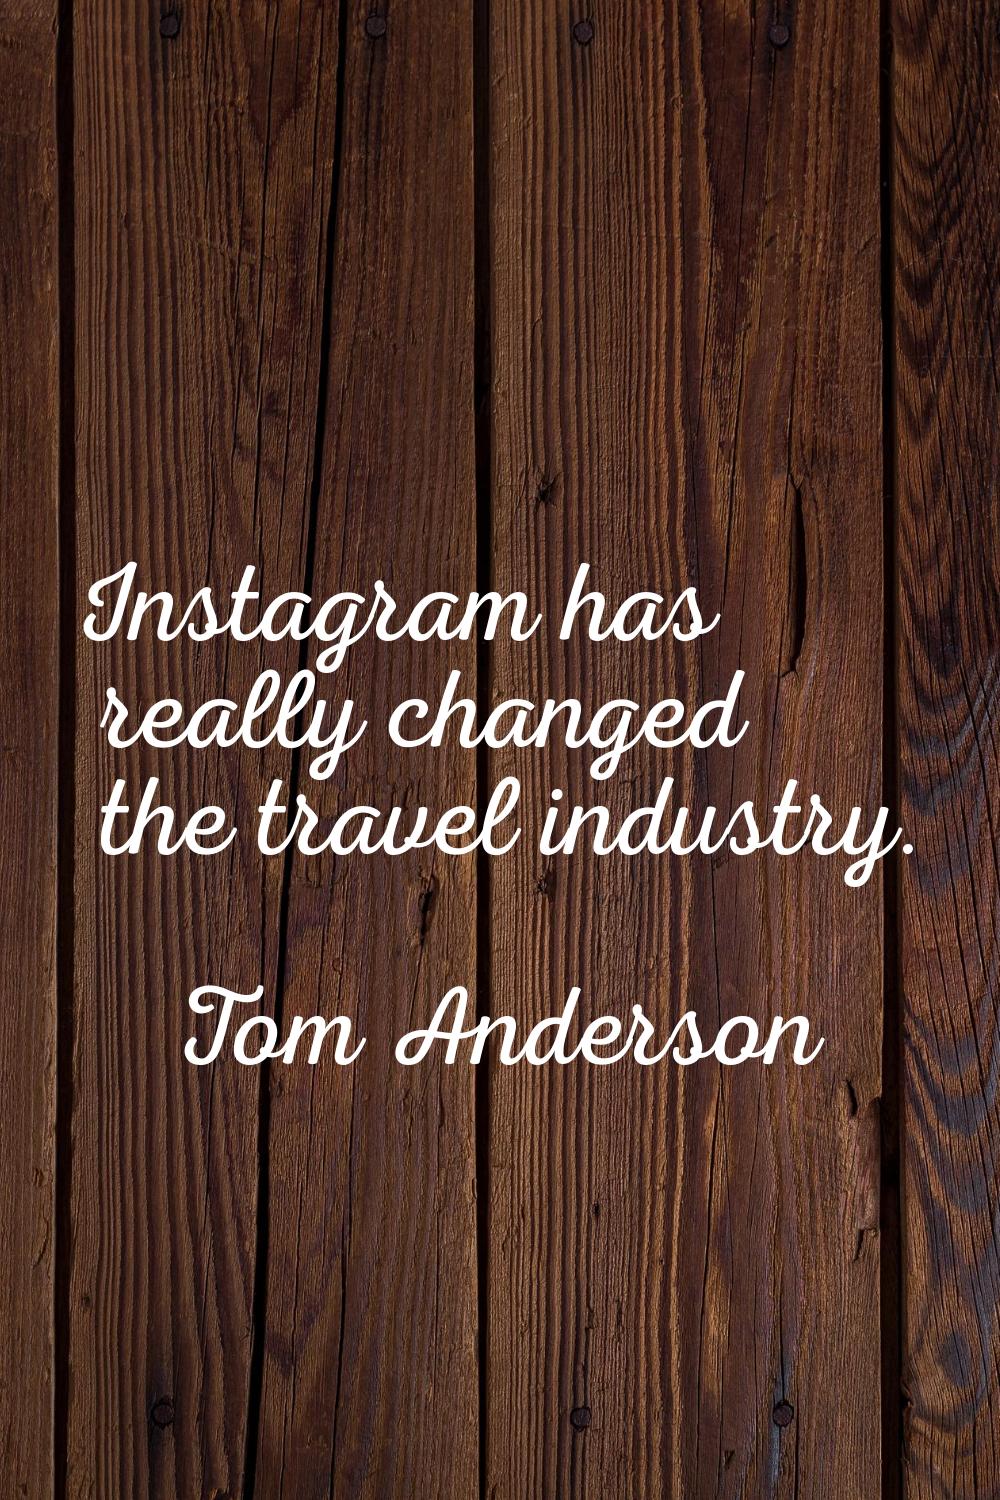 Instagram has really changed the travel industry.